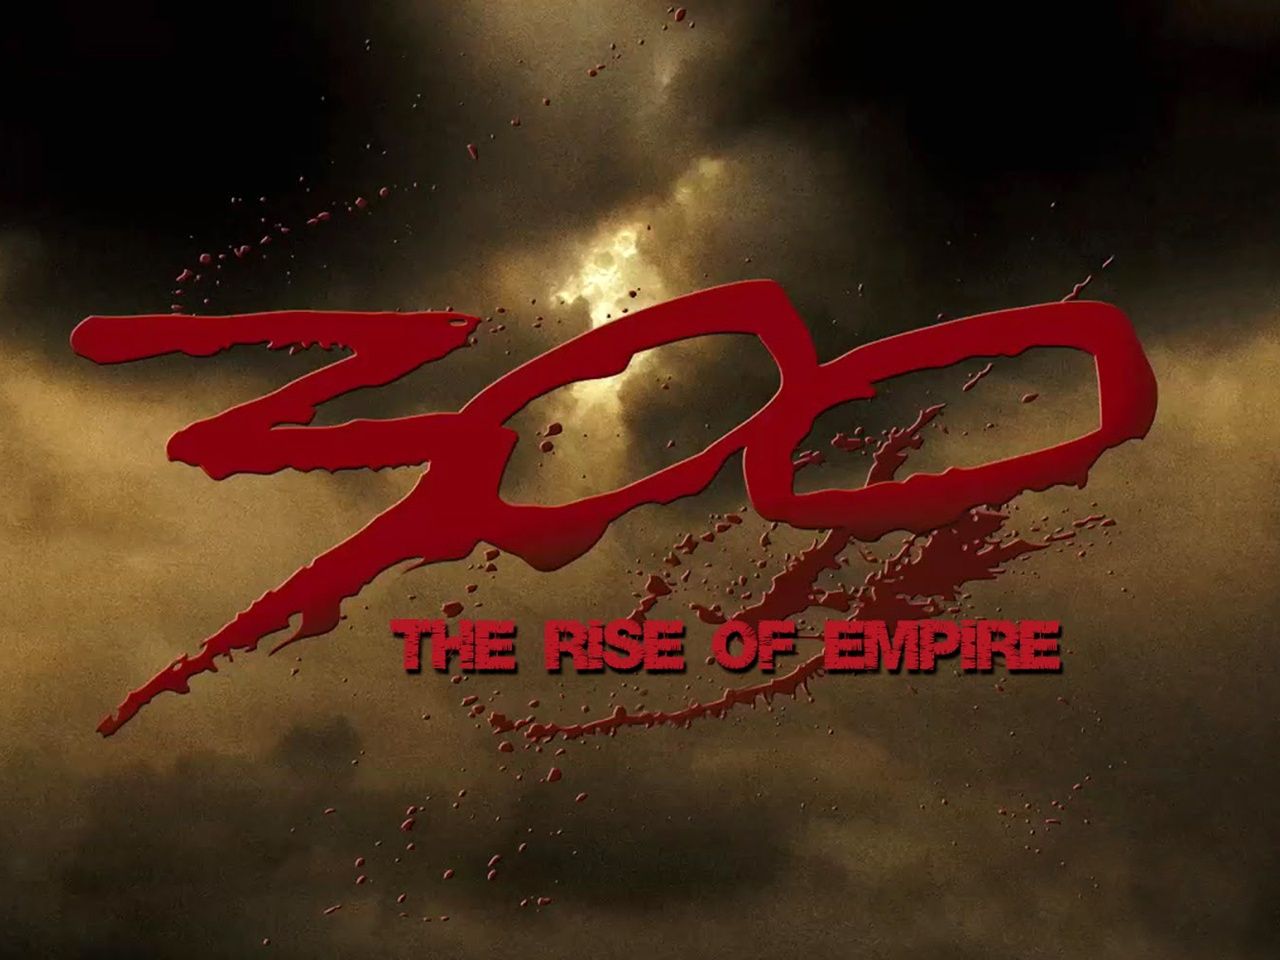 300 Rise Of An Empire movie actress hd wallpaper free | Daily pics ...